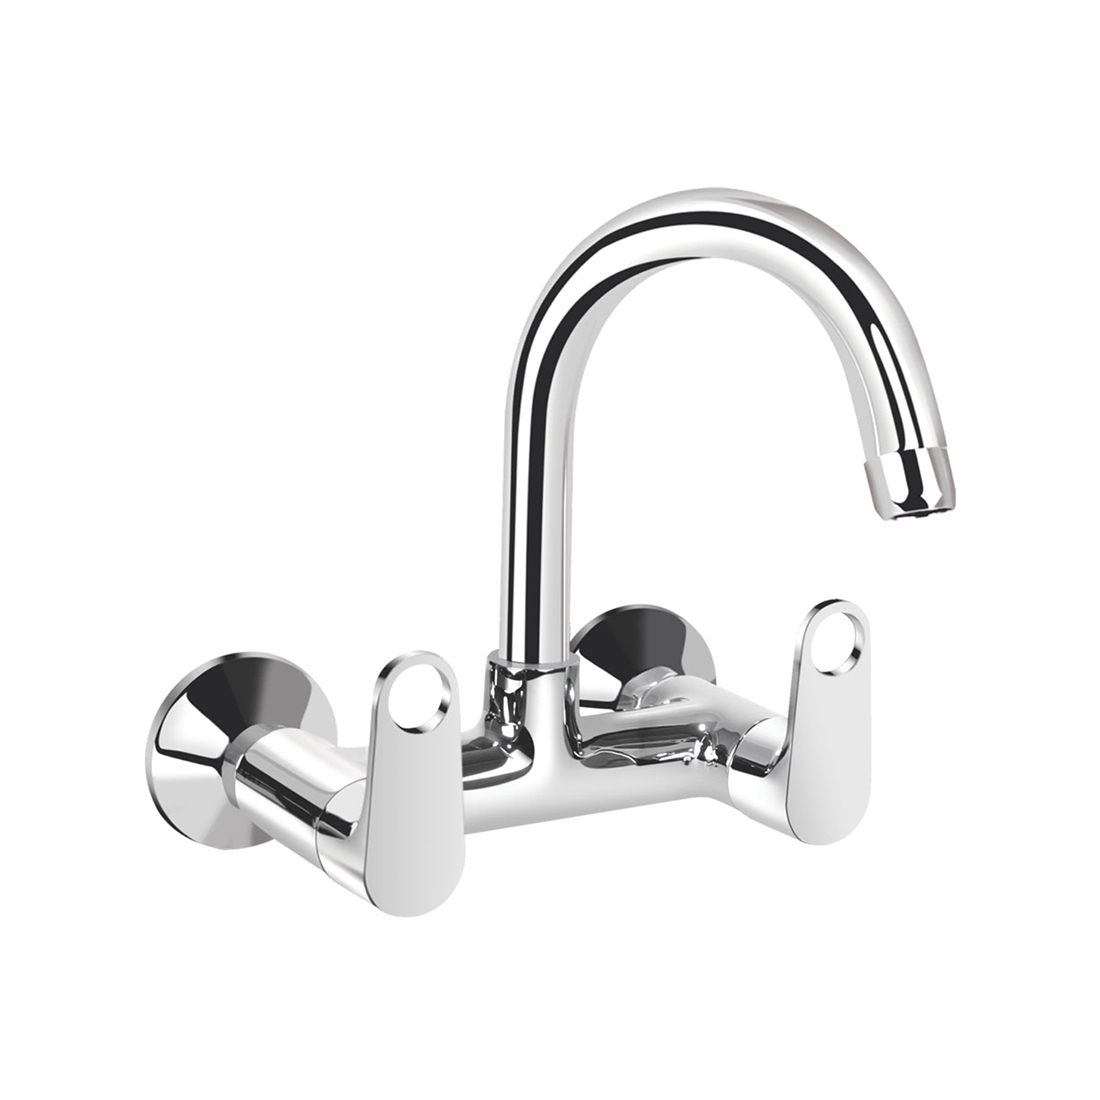 Kerovit Hydrus Plus KB511024 Sink Mixer With Swivel Spout and Flange